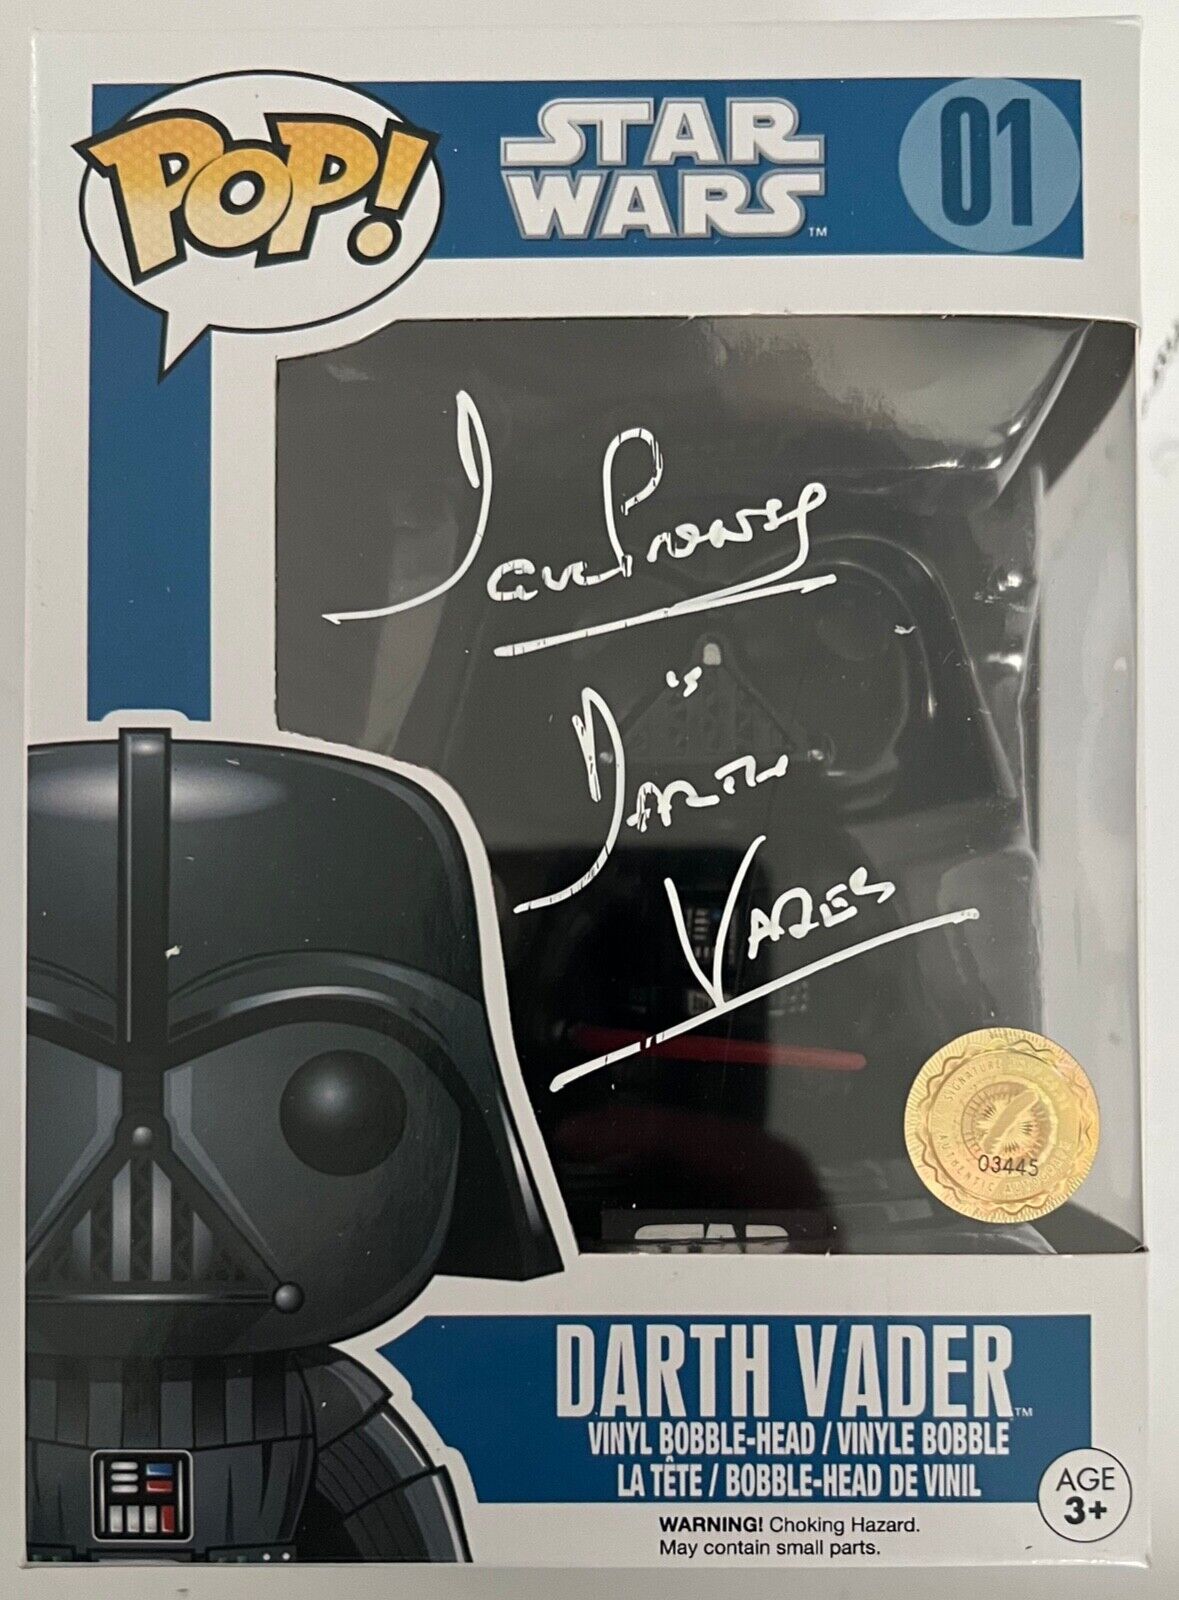 Dave Prowse Hand Signed Funko Pop #01 Figure Star Wars Autograph